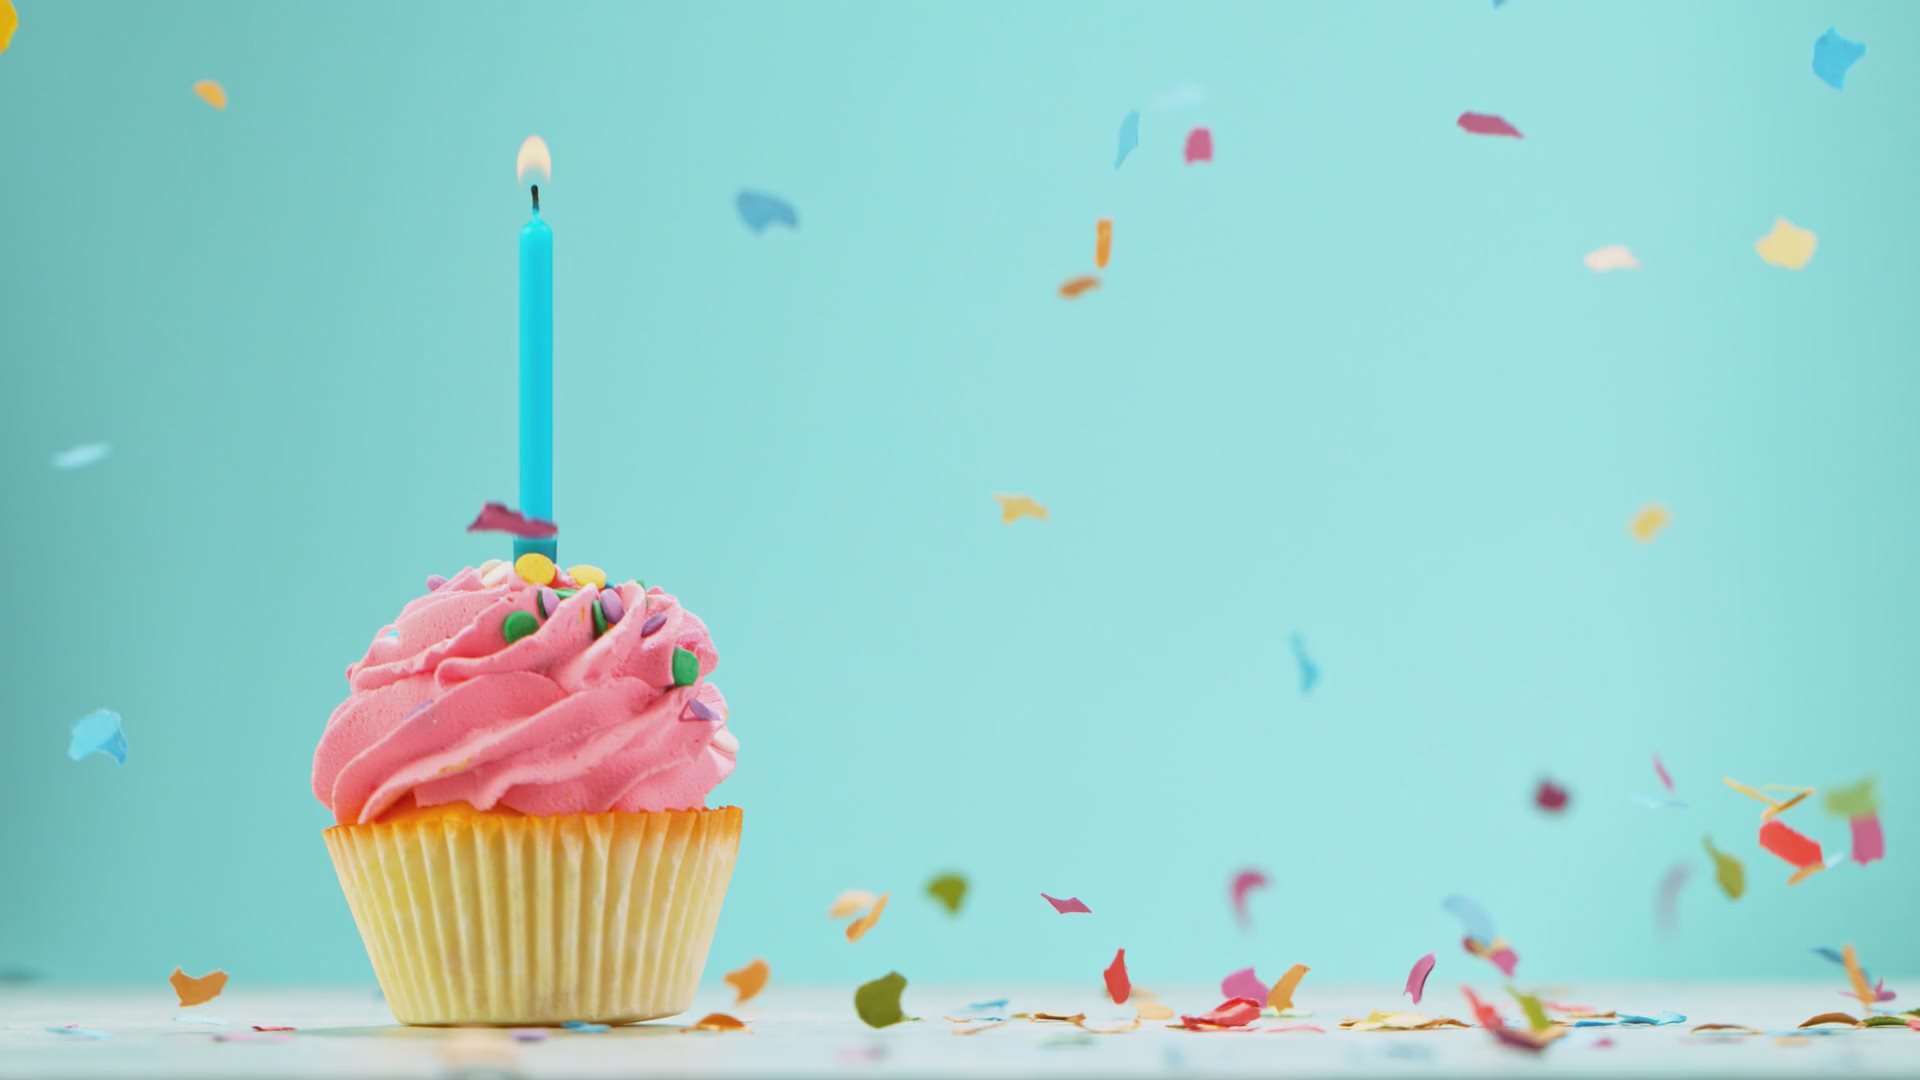 Video of a Birthday cupcake with burning candle and flying confetti